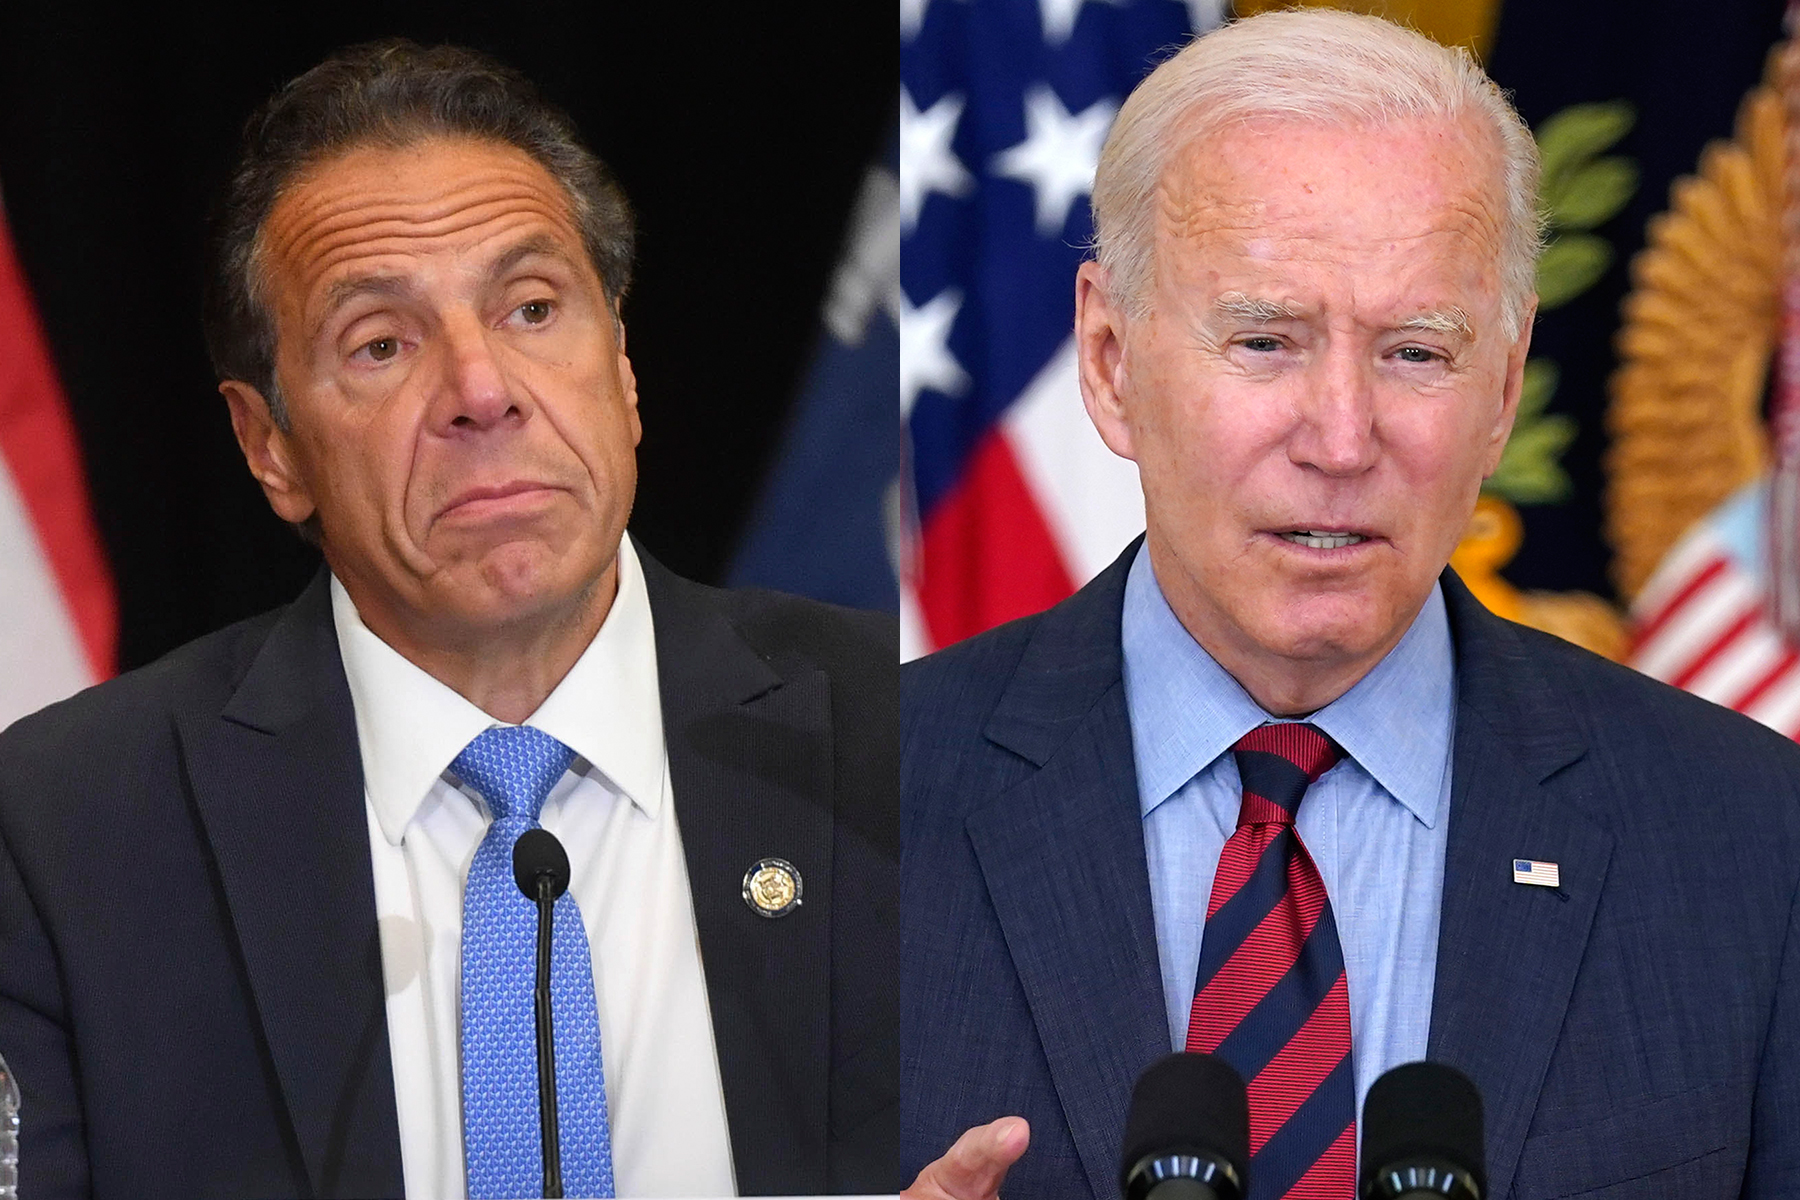 Biden Calls on Cuomo to Resign Over Harassment Allegations